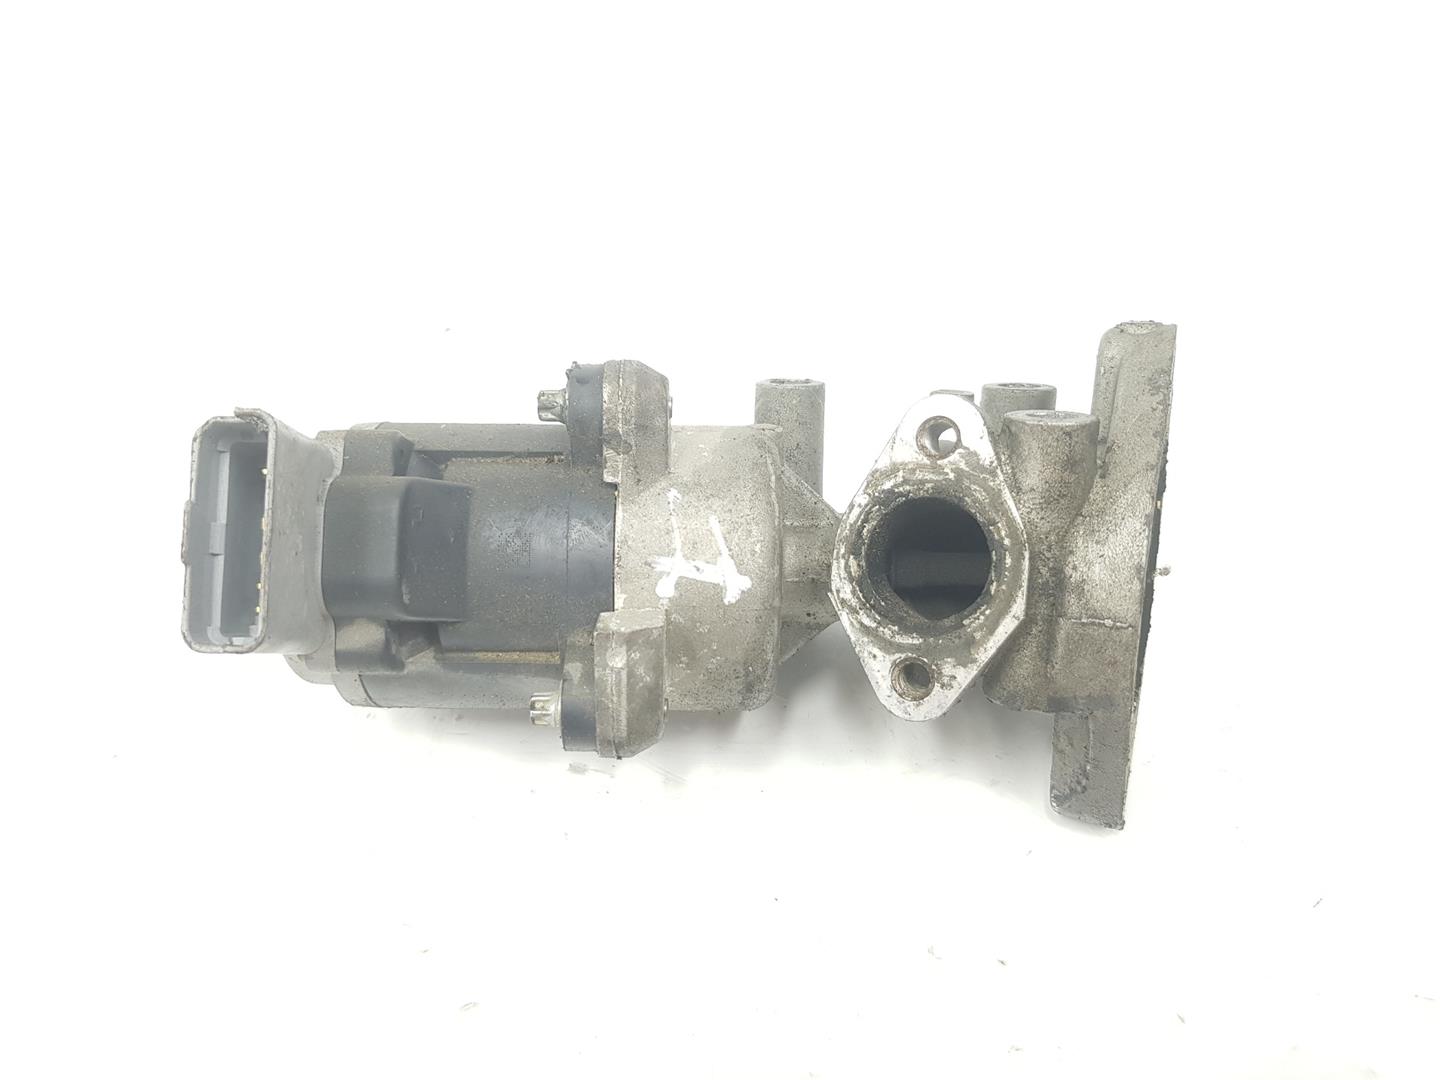 LAND ROVER Discovery 4 generation (2009-2016) EGR Valve LR009809, 7H2Q9D475CF, 1111AA 19879478